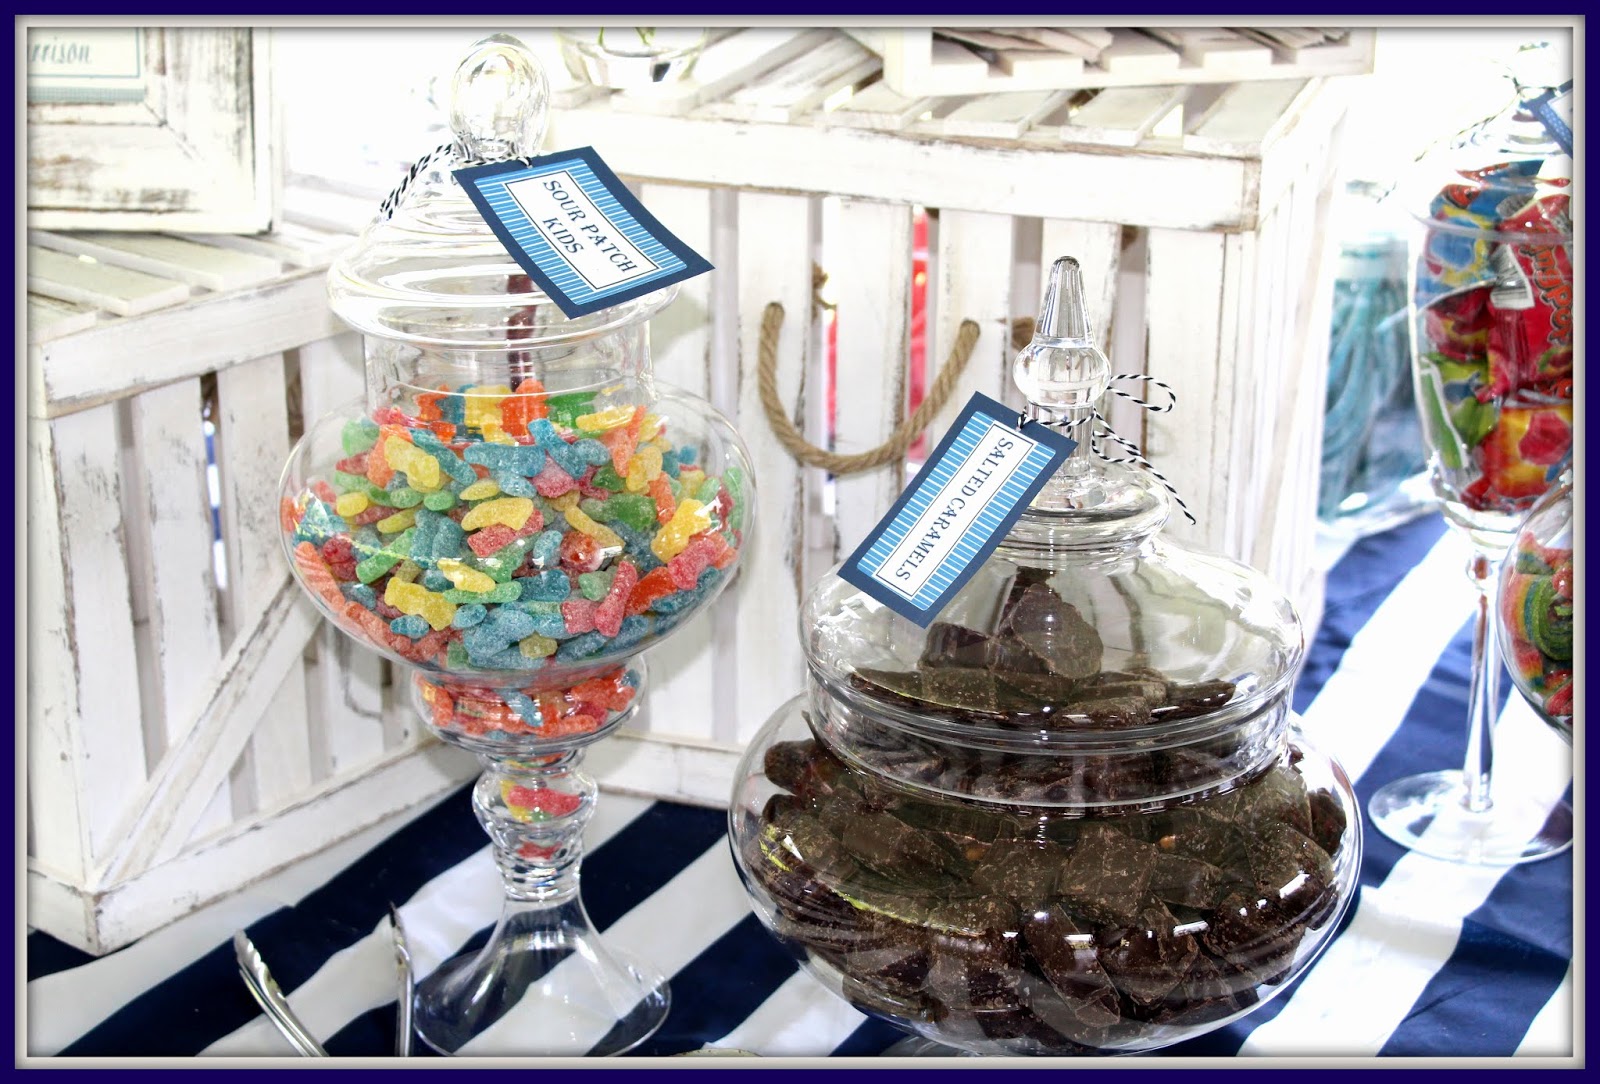 The Vintage Chateau: Candy Buffet 1980's Style